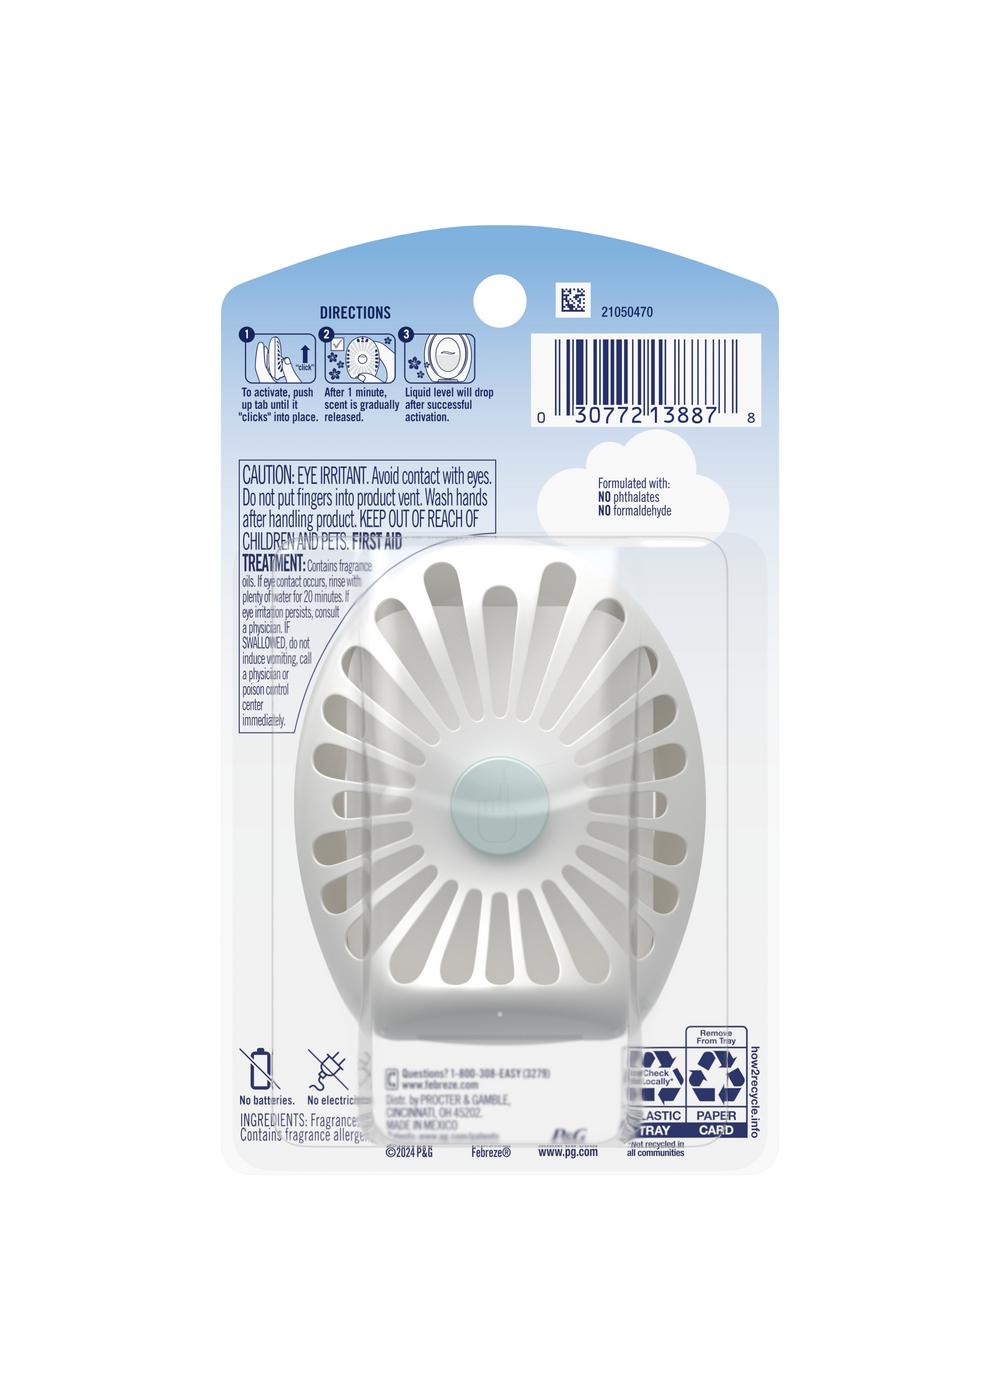 Febreze Odor Fighter Small Spaces Air Freshener - Crisp Fall Breeze; image 2 of 2